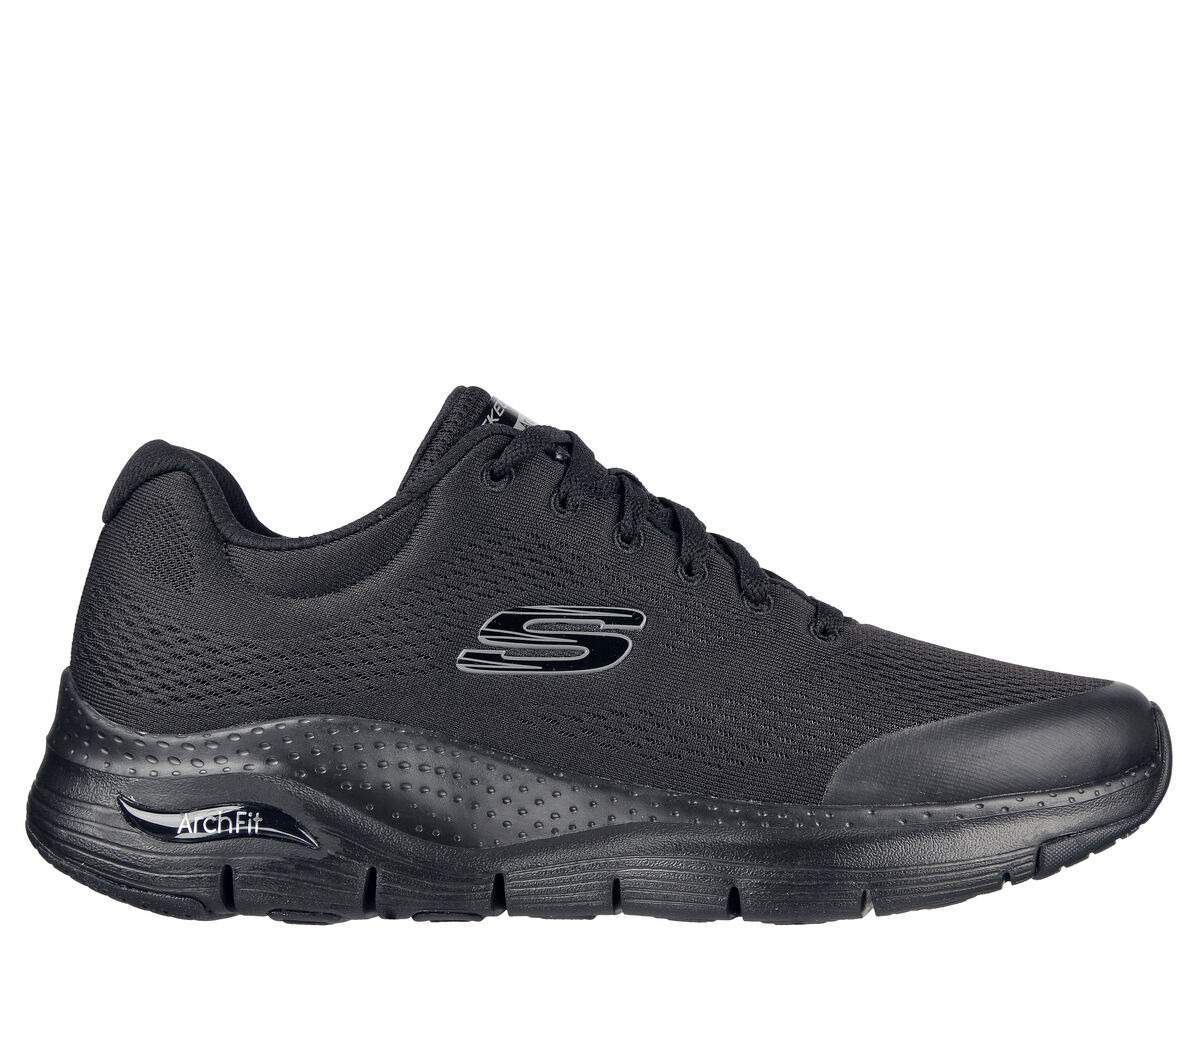 Where to Buy Skechers Arch Fit?